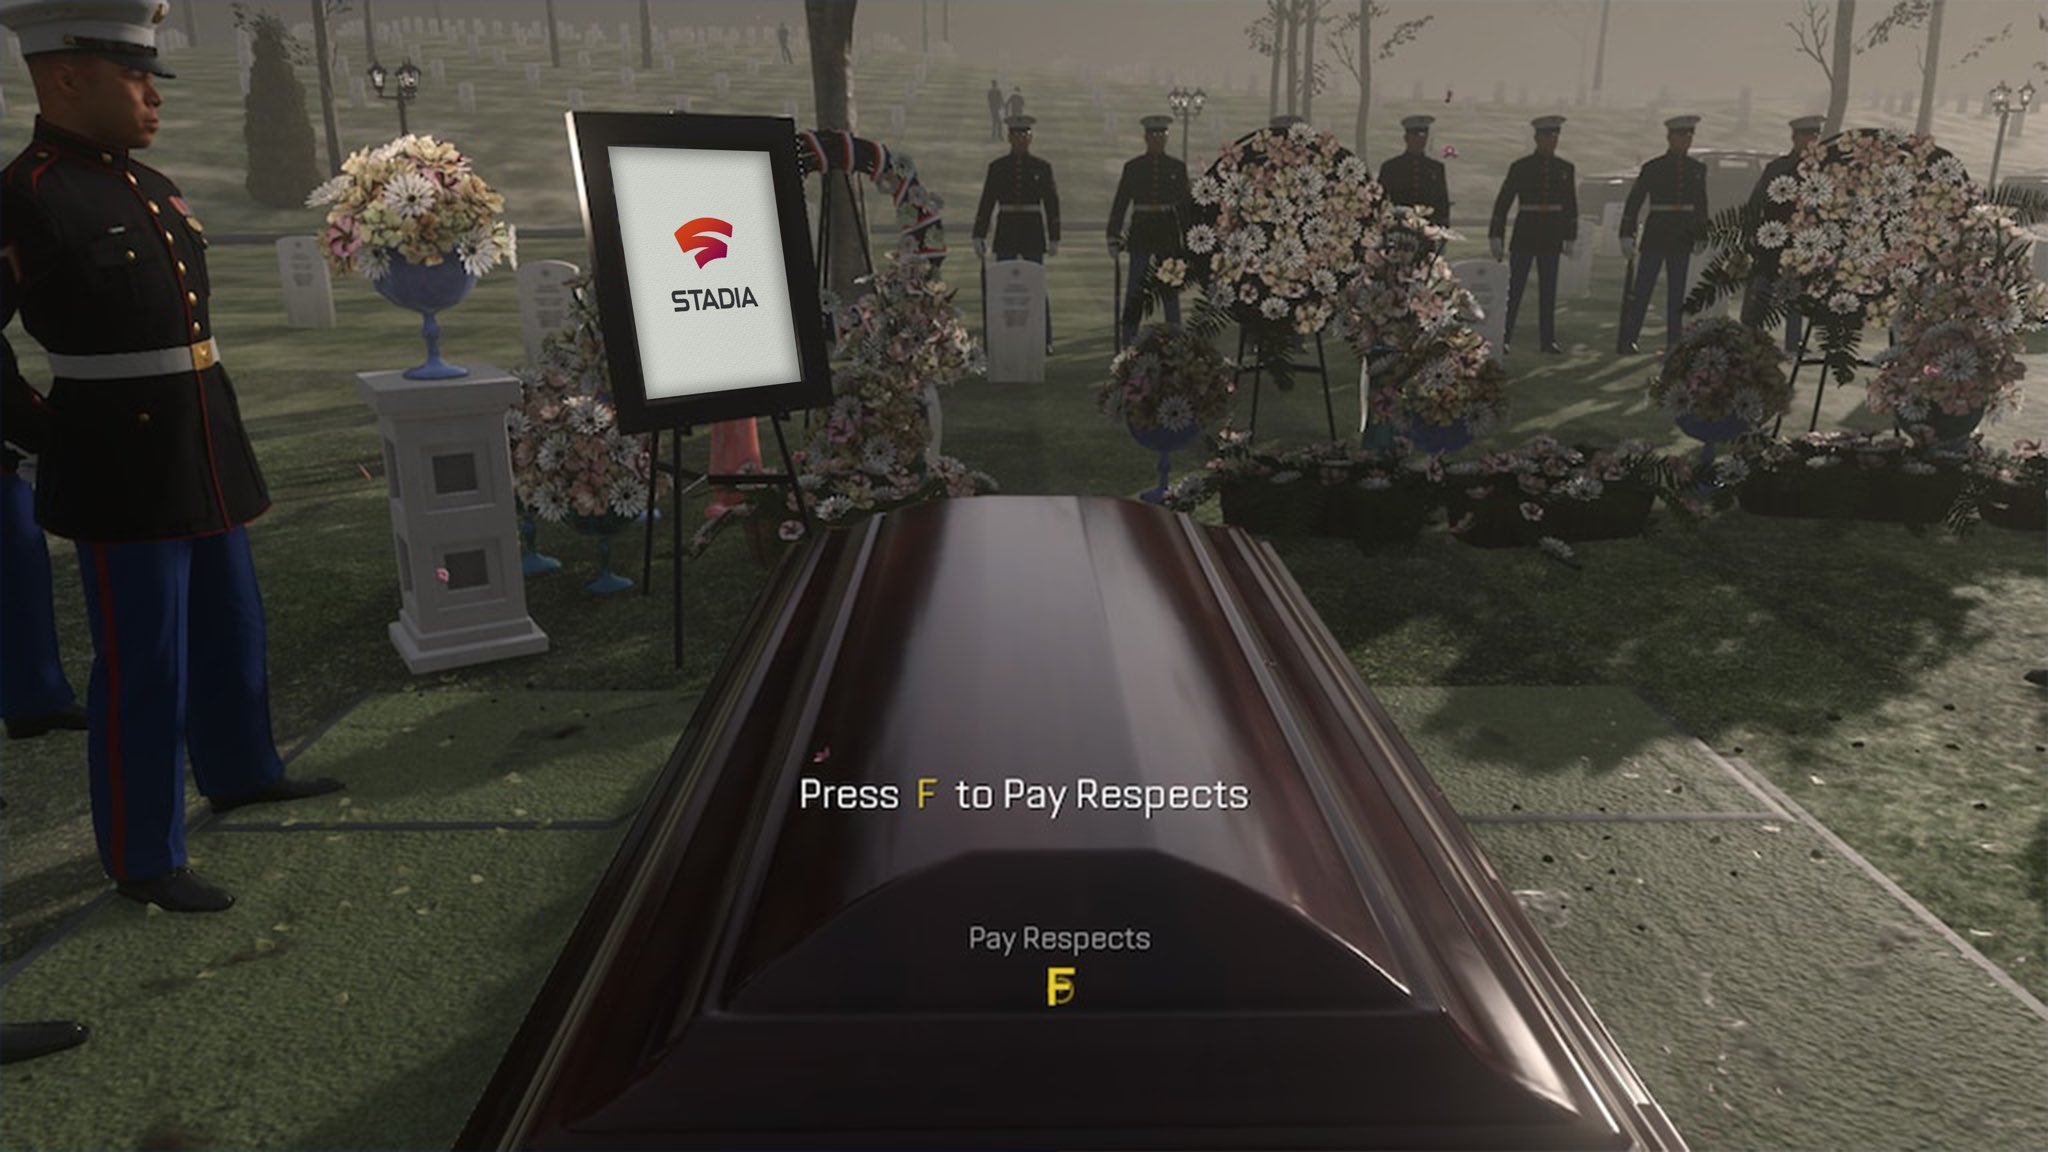 f-to-pay-respects-press-f-to-pay-respects.gif - ELITE LCD GIF